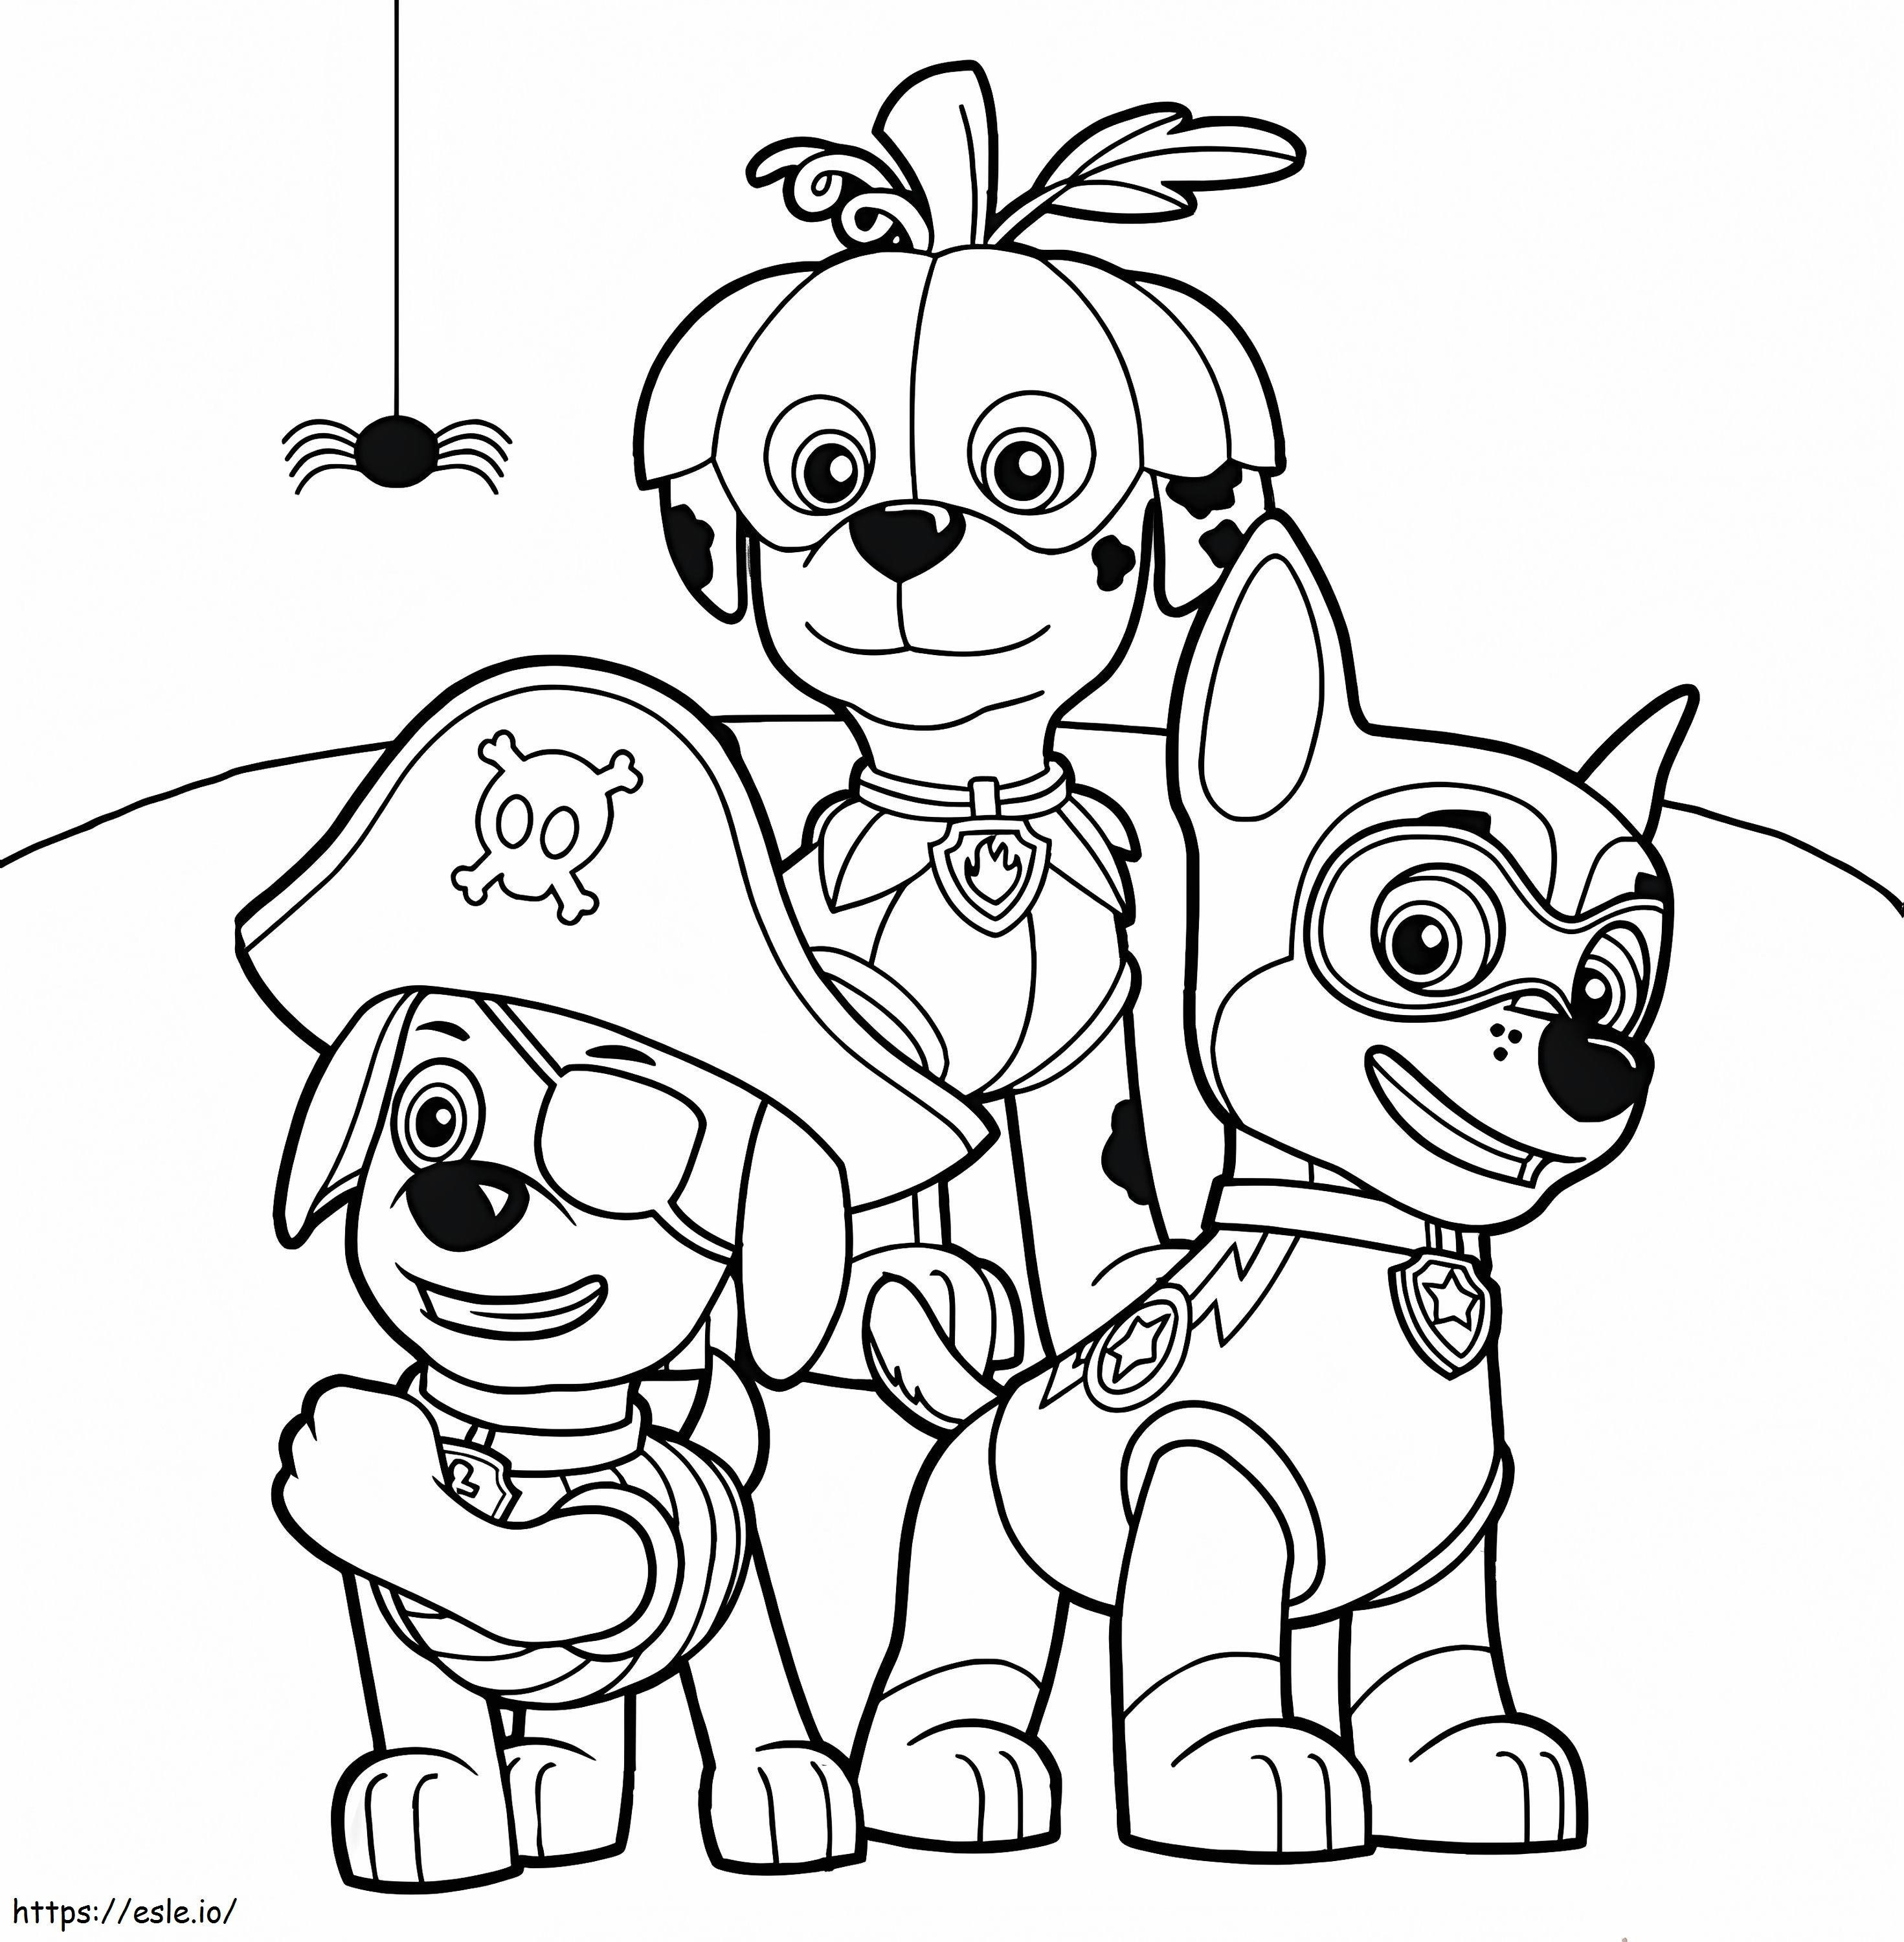 Chase Paw Patrol 8 coloring page